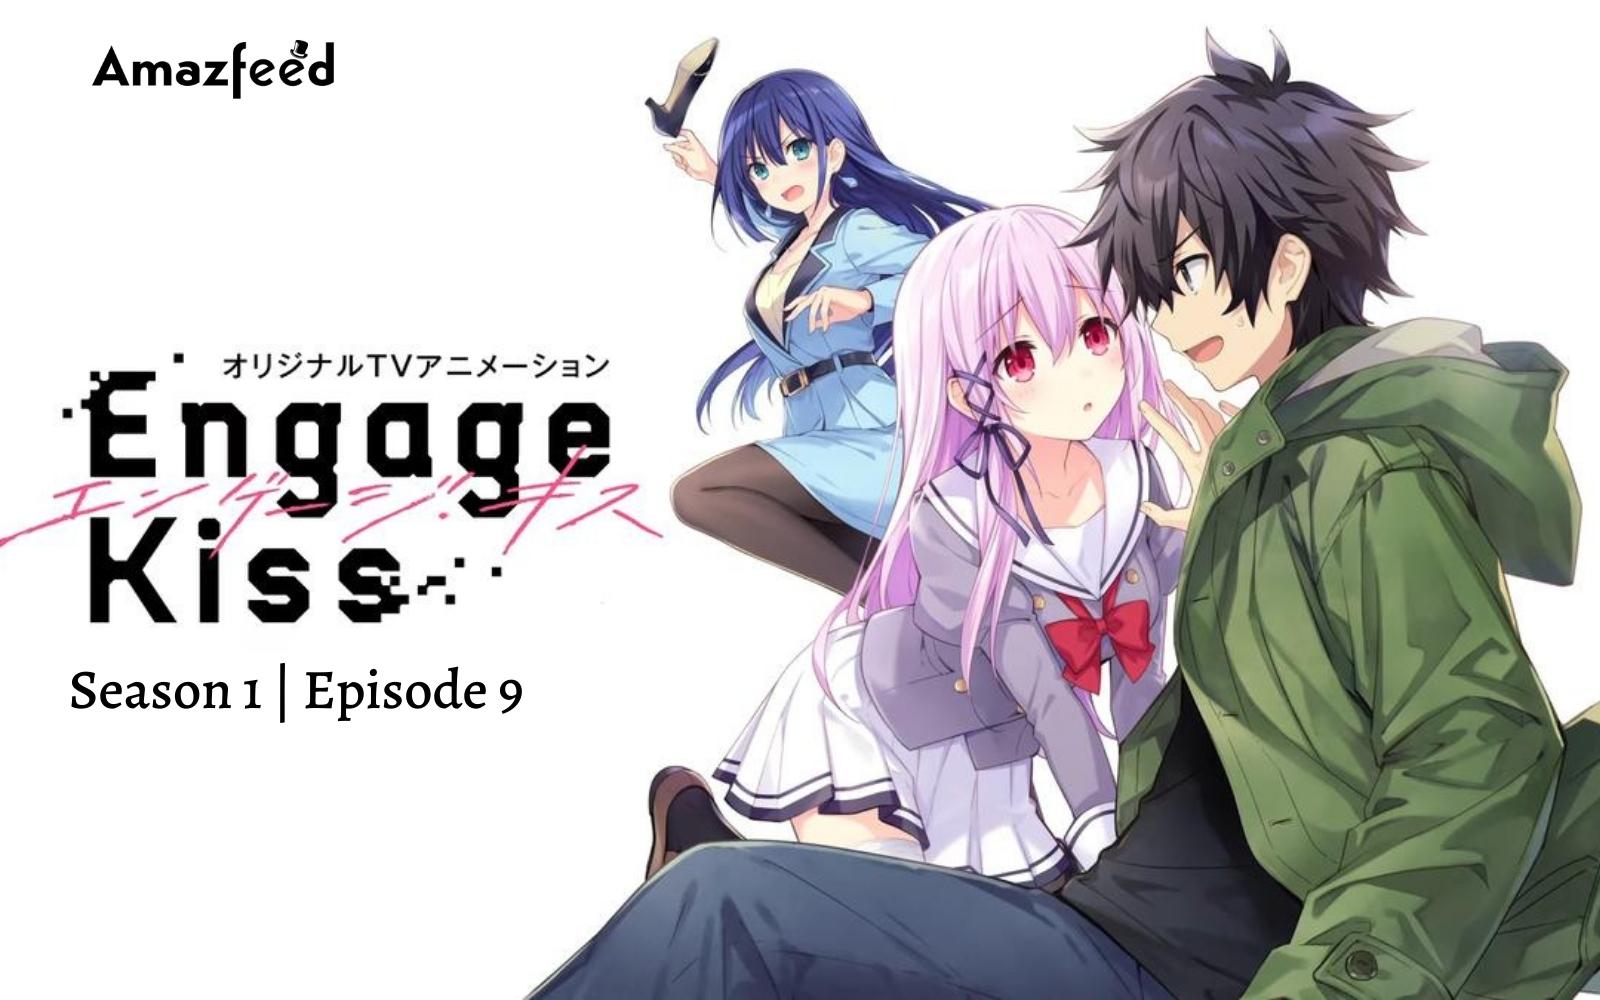 Engage Kiss Episode 9 : Countdown, Release Date, Spoiler, Recap, Where to Watch & Cast